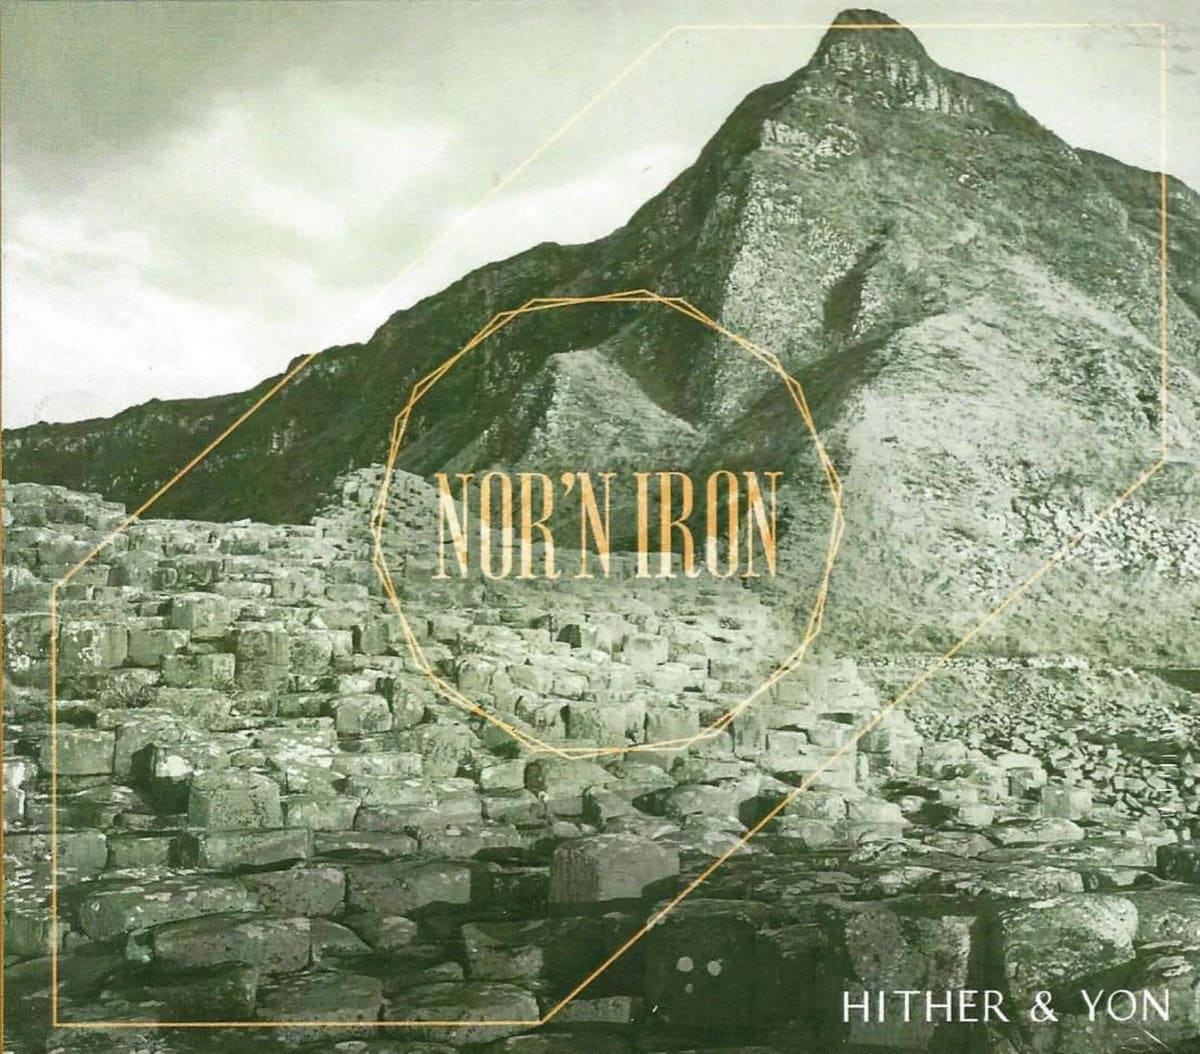 Cover art for Nor'n Iron by Hither & Yon. Full record & mix: Infidel Studios